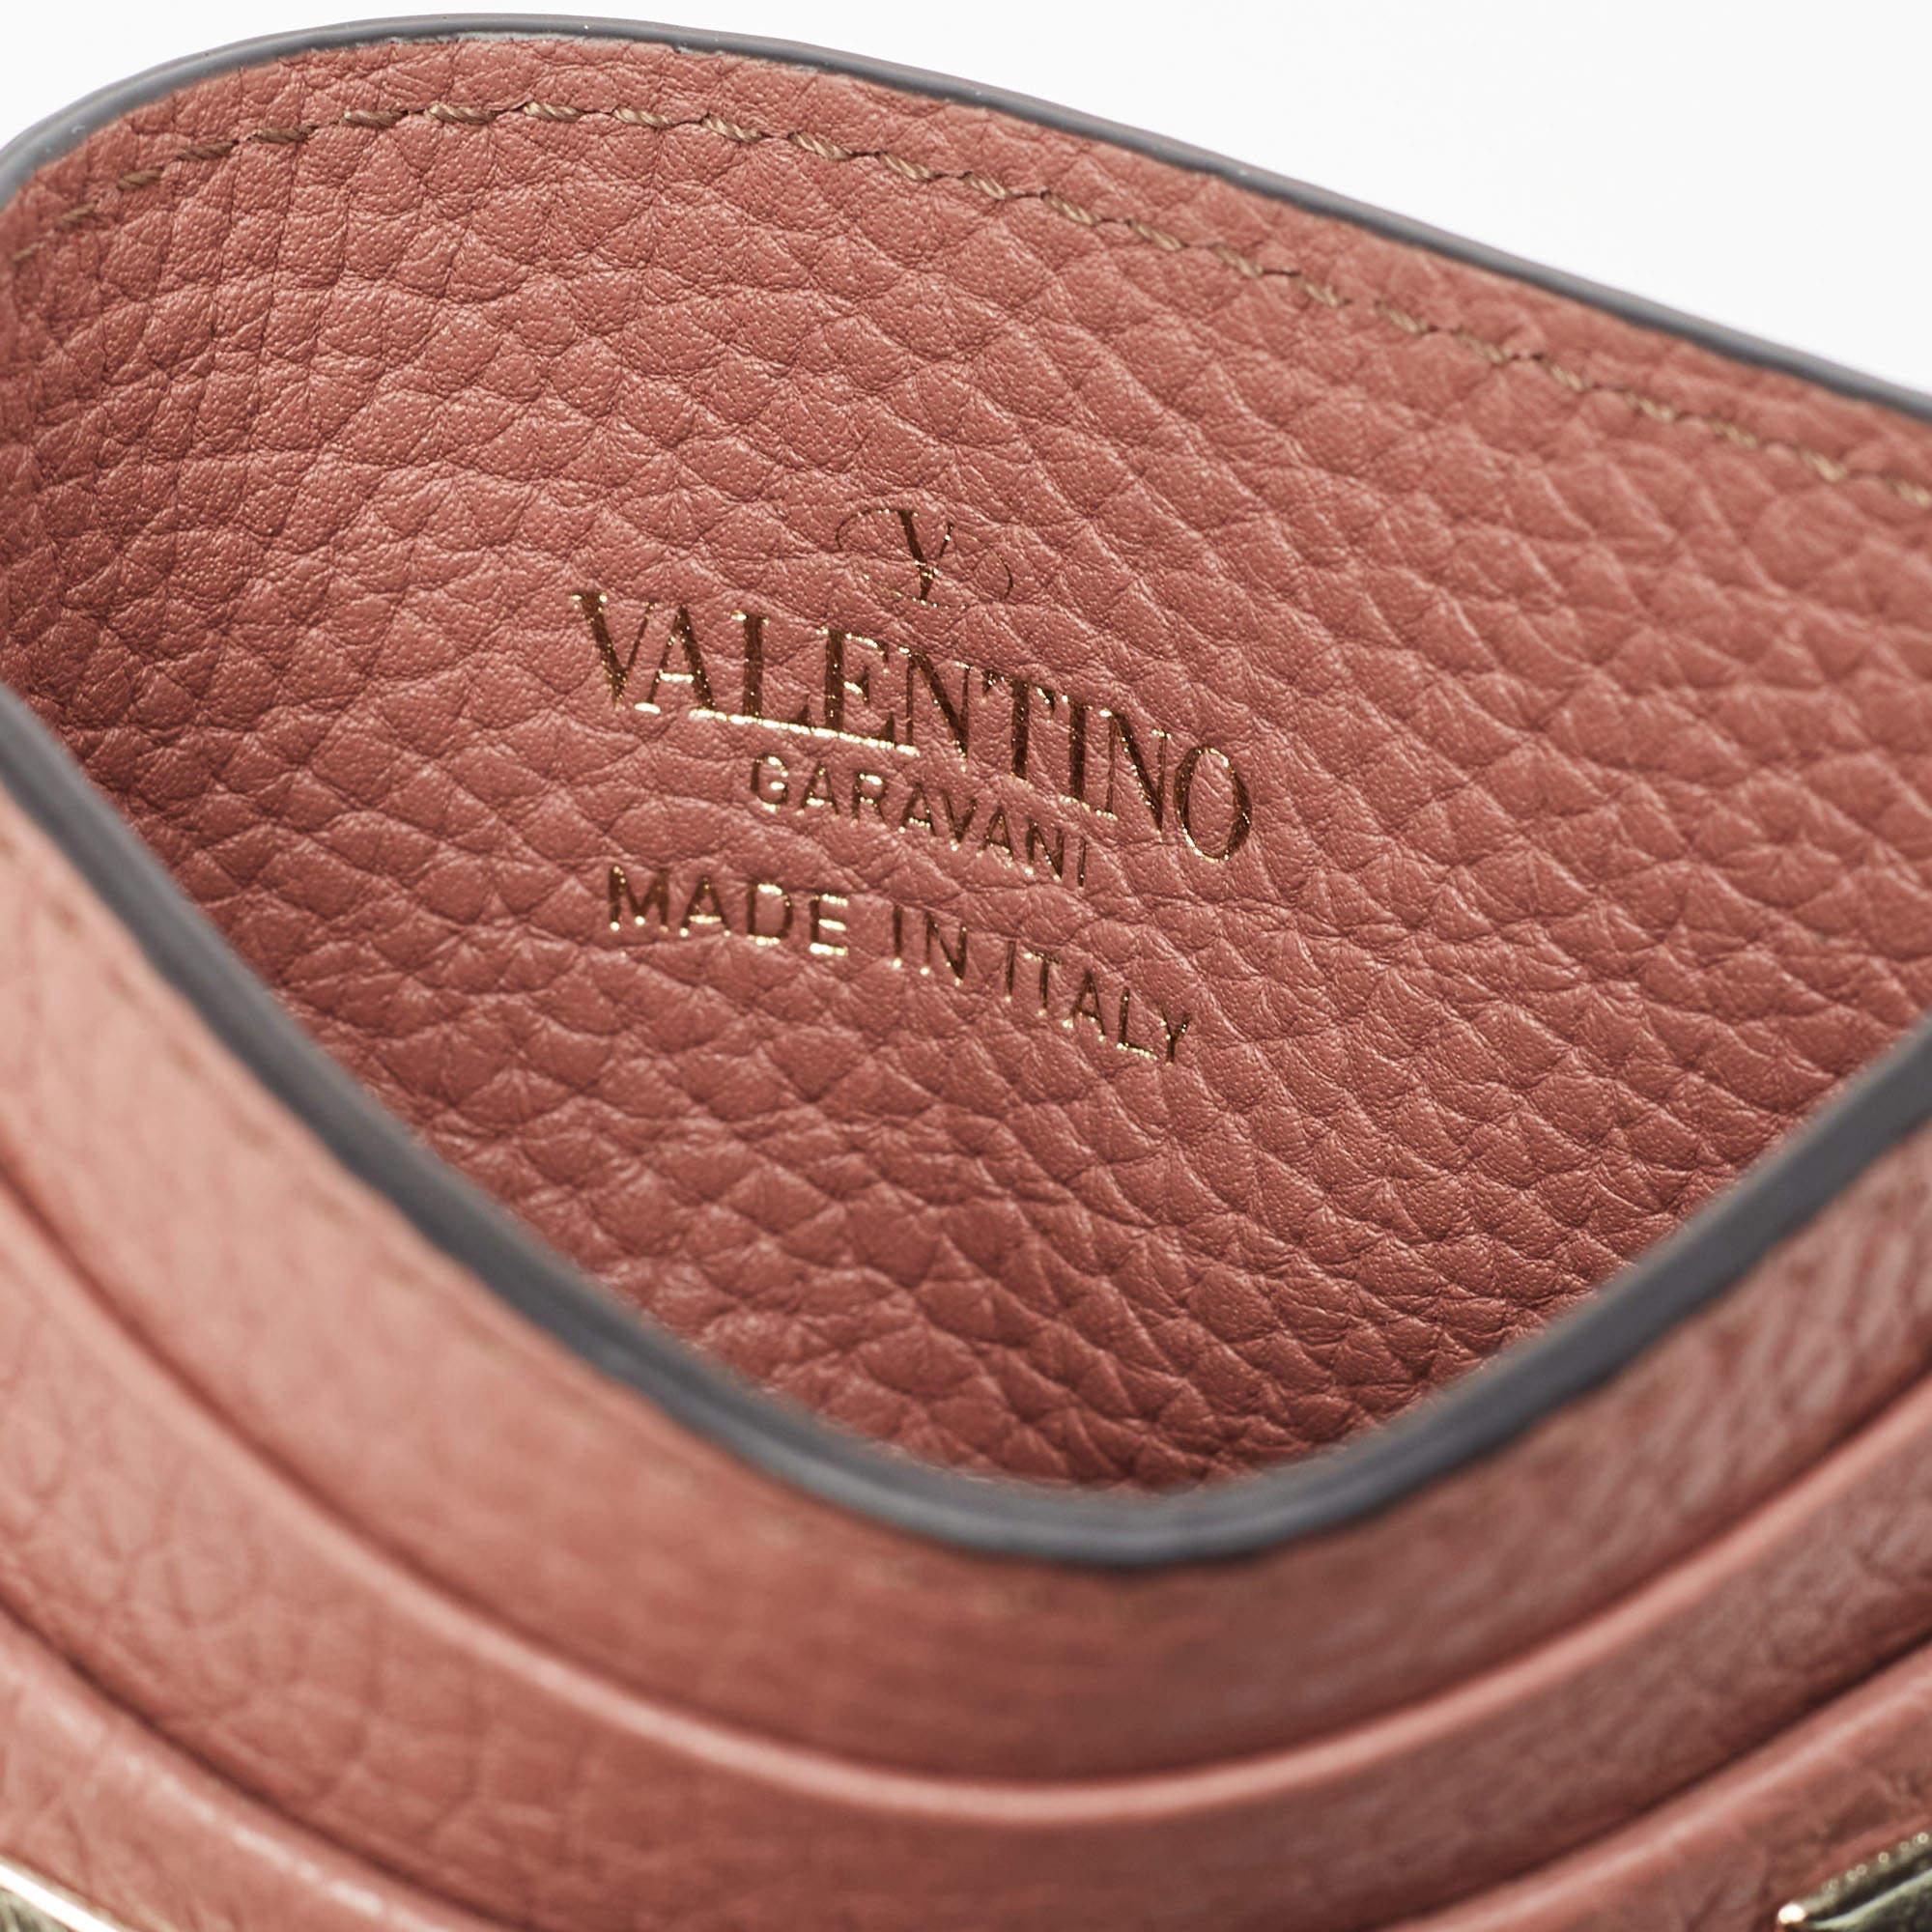 This Valentino cardholder is carefully crafted to offer you a luxurious accessory you will cherish. It is marked by high quality and enduring appeal. Invest in it today!

Includes: Original Box, Info Booklet, Extra Embellishments